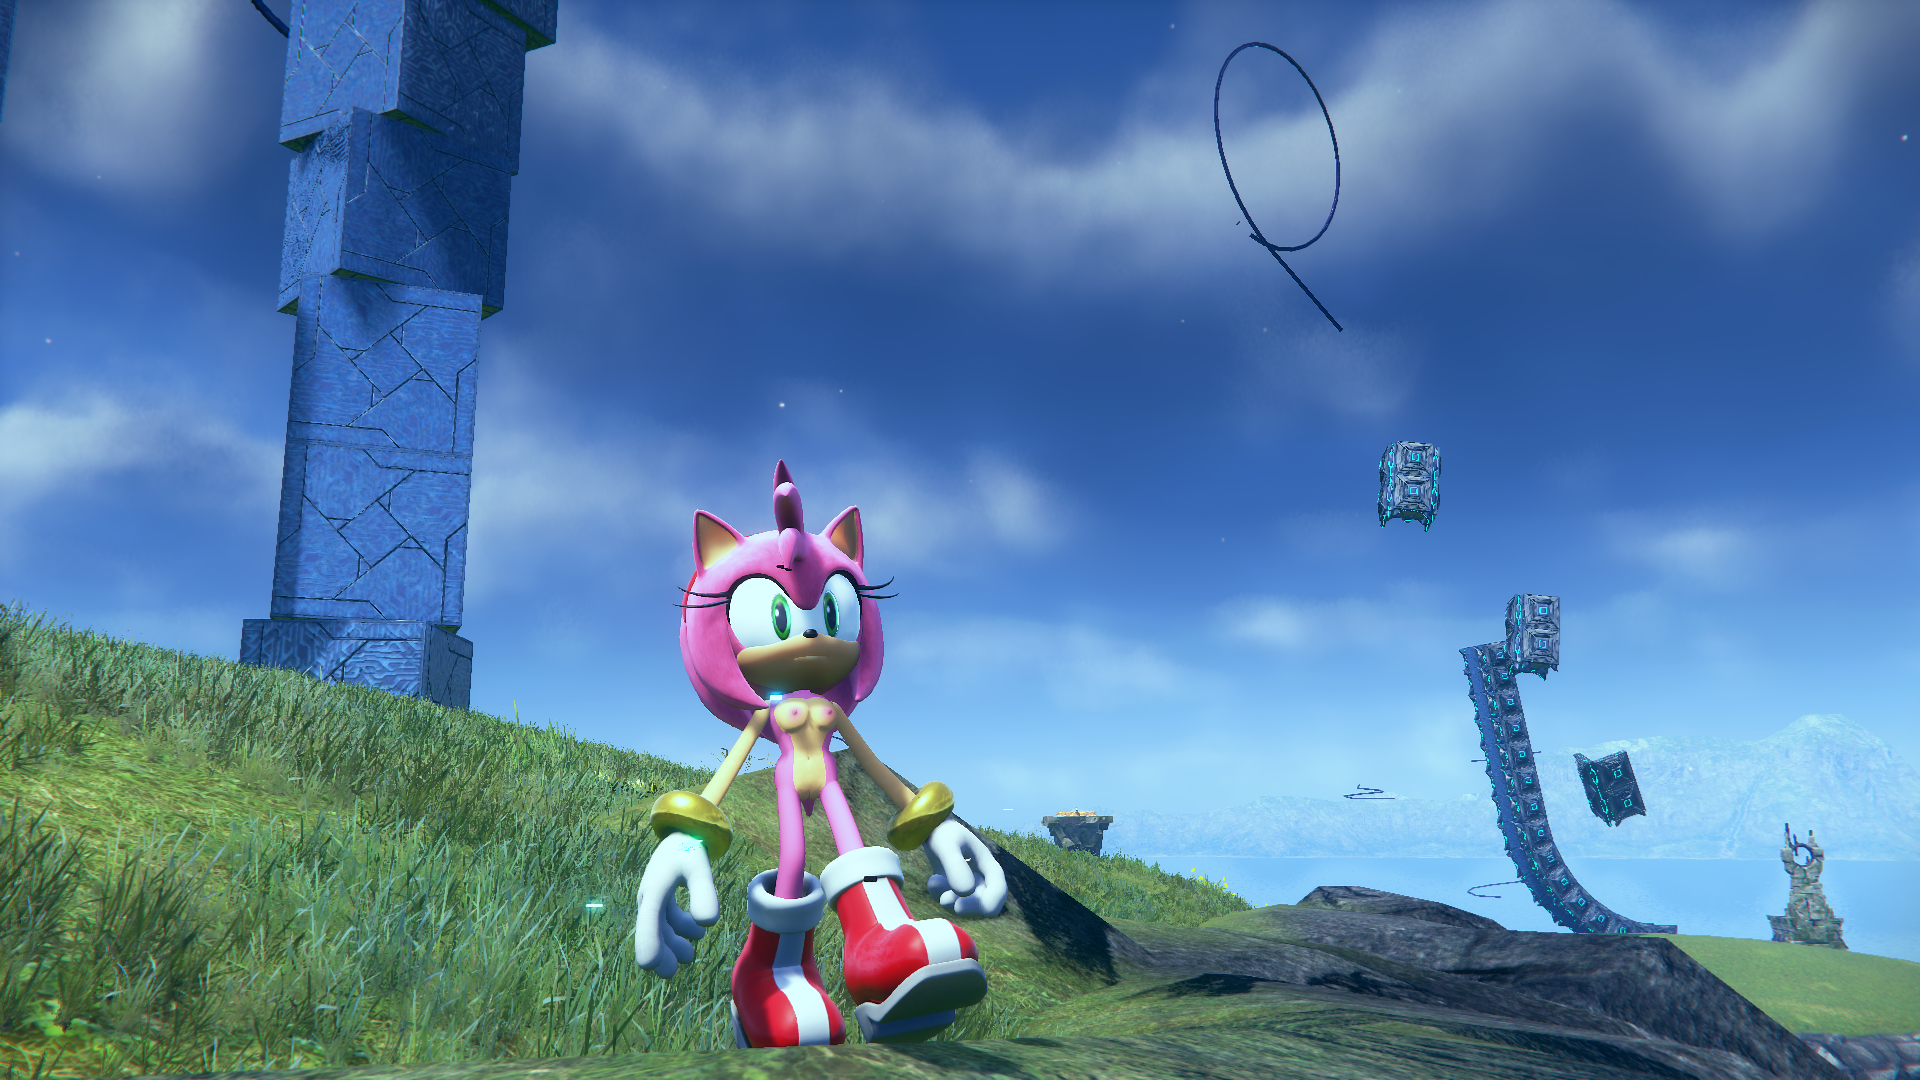 Sonic frontiers Modding? - Page 3 - Adult Gaming - LoversLab